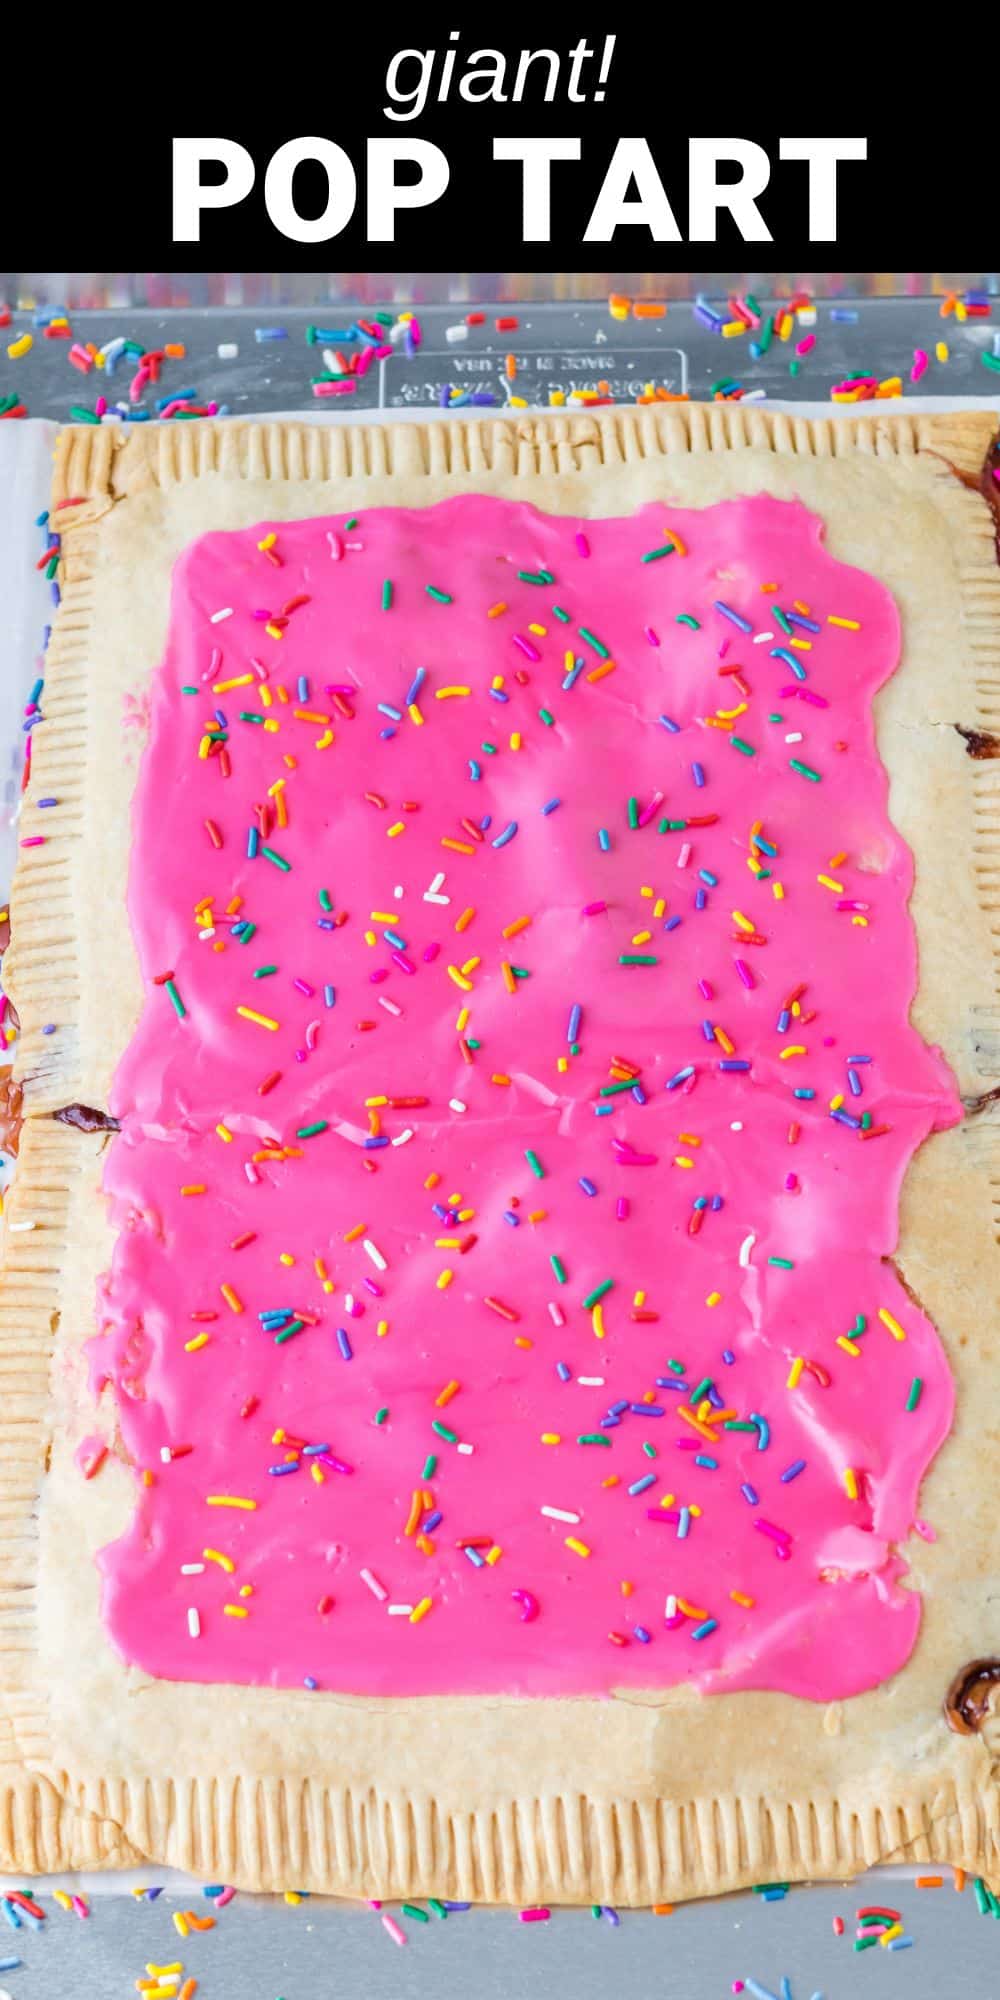 This giant pop tart recipe is a fun adaptation of a childhood favorite. Not your ordinary strawberry pop tart, this homemade version is the size of an entire sheet pan, creating a delicious pastry treat that the whole family can share.